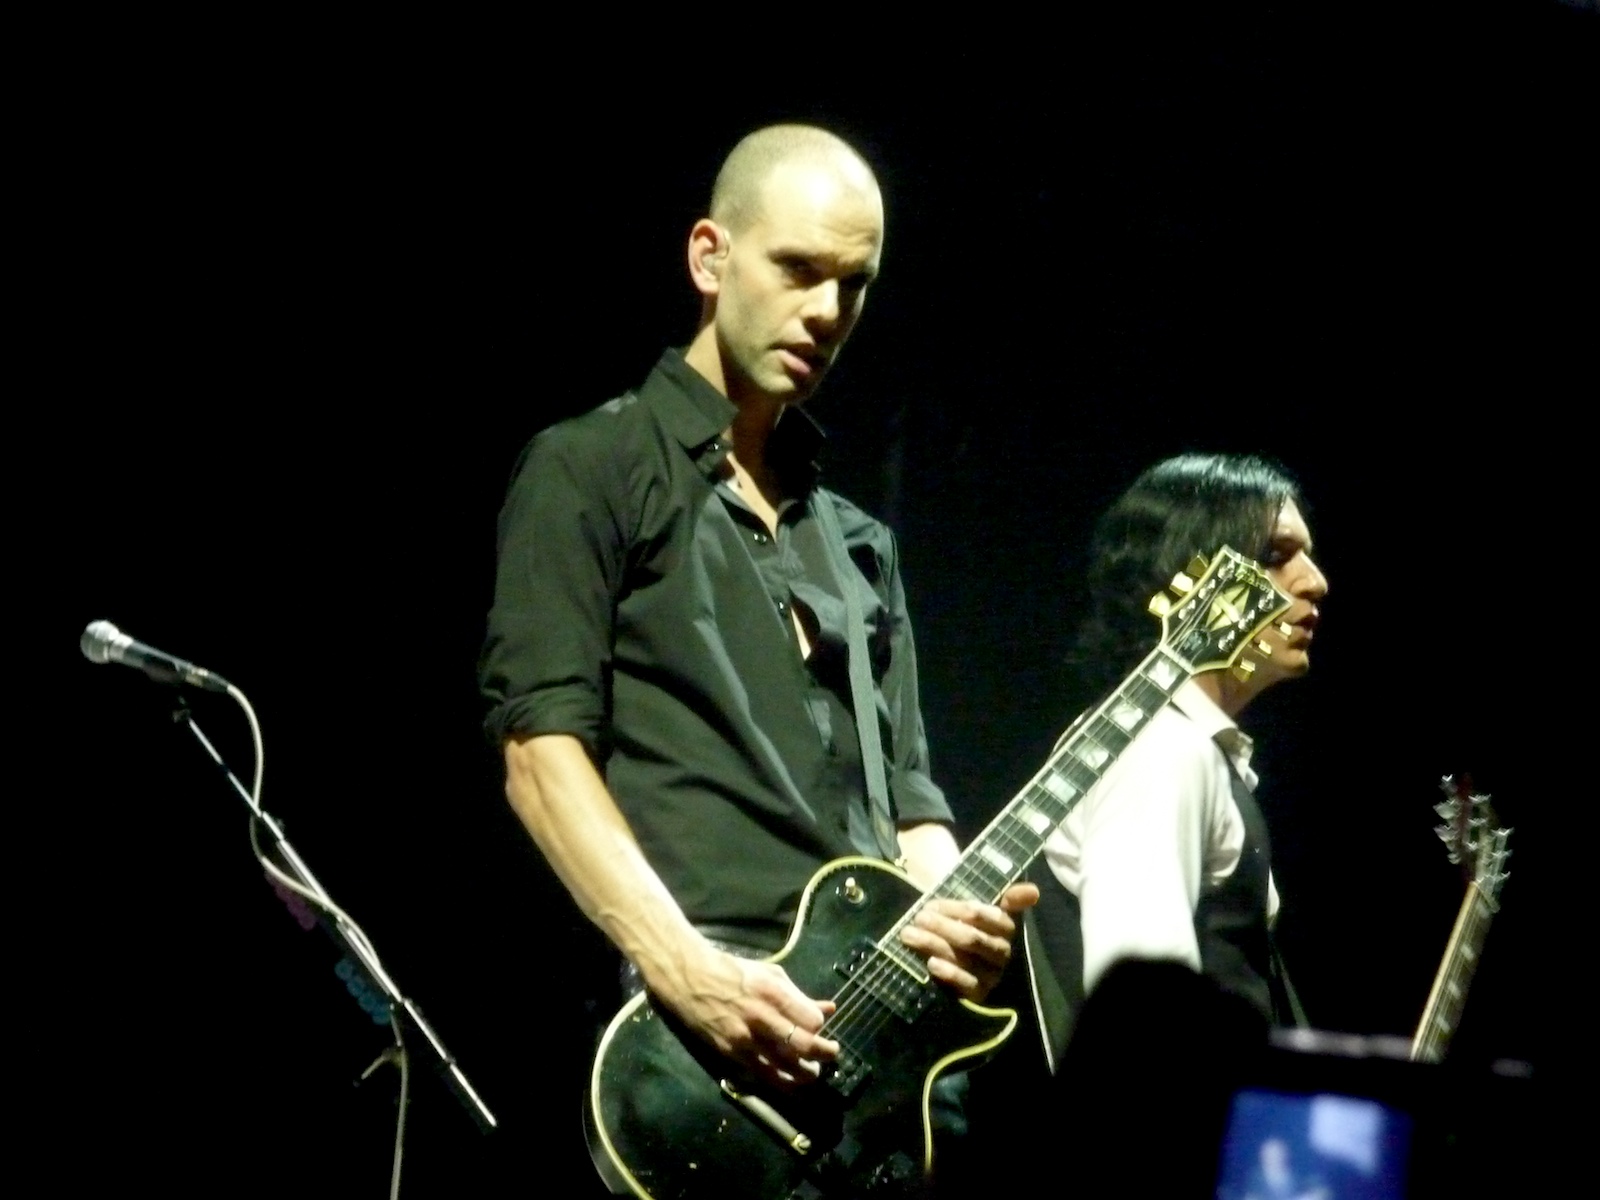 a man playing guitar on stage while another man plays a guitar